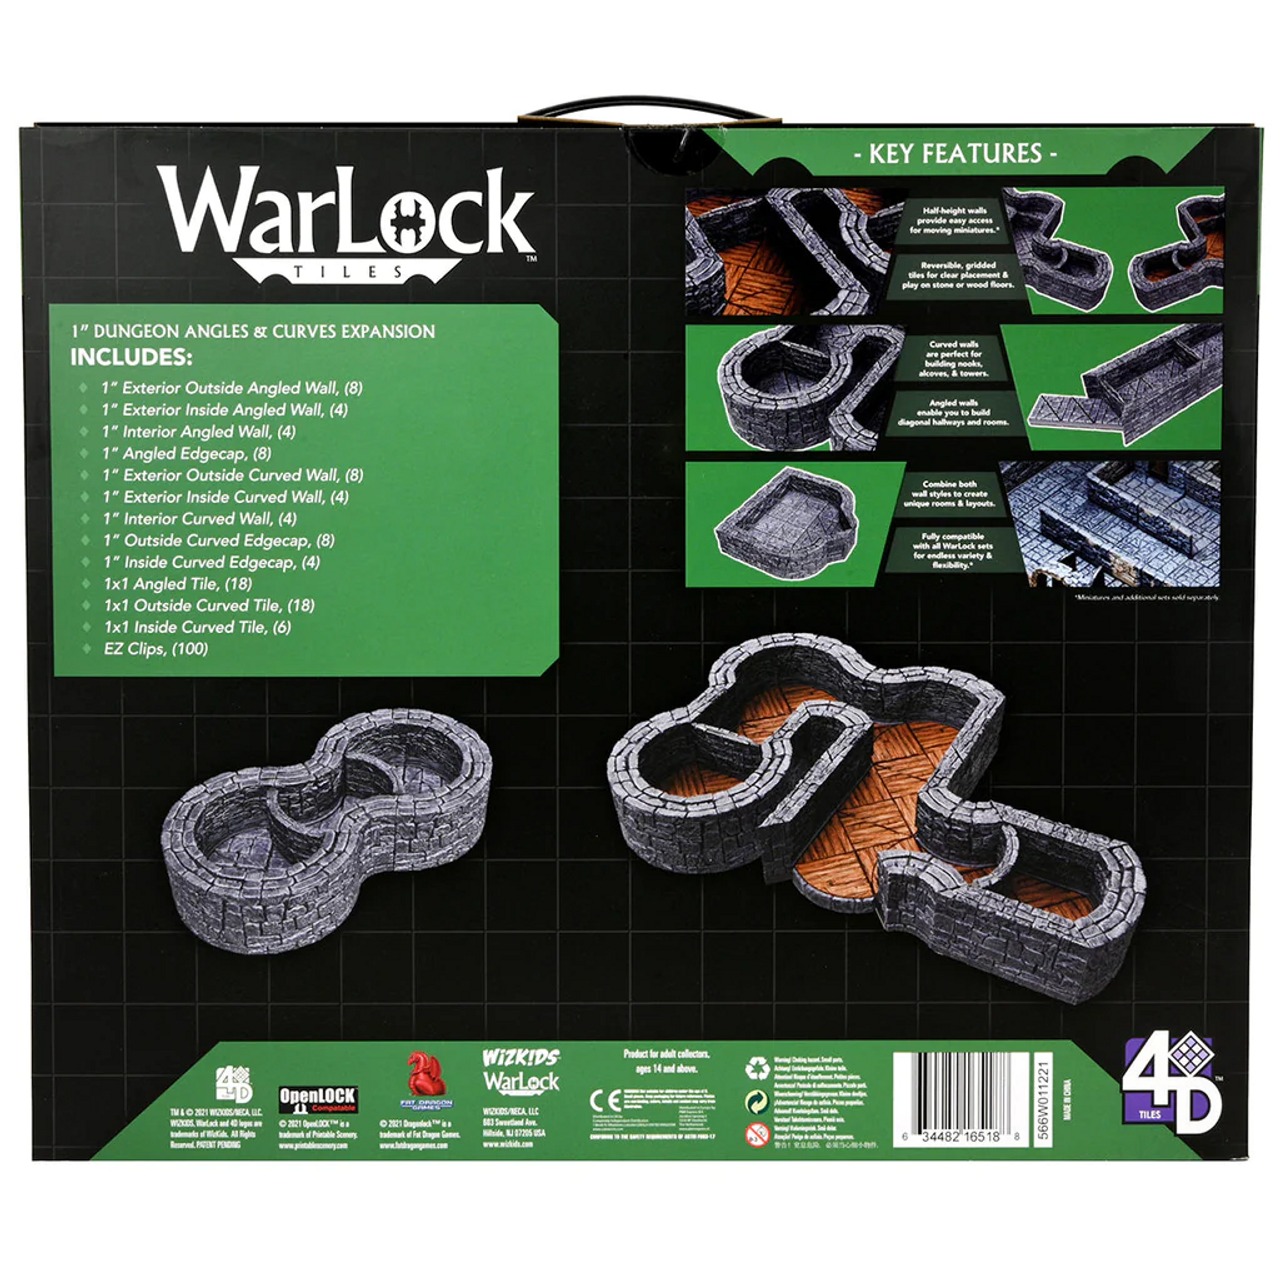 WizKids Dungeons & Dragons WarLock Tiles Expansion Pack 1 in Dungeon Angles & Curves-1701933466.jpg